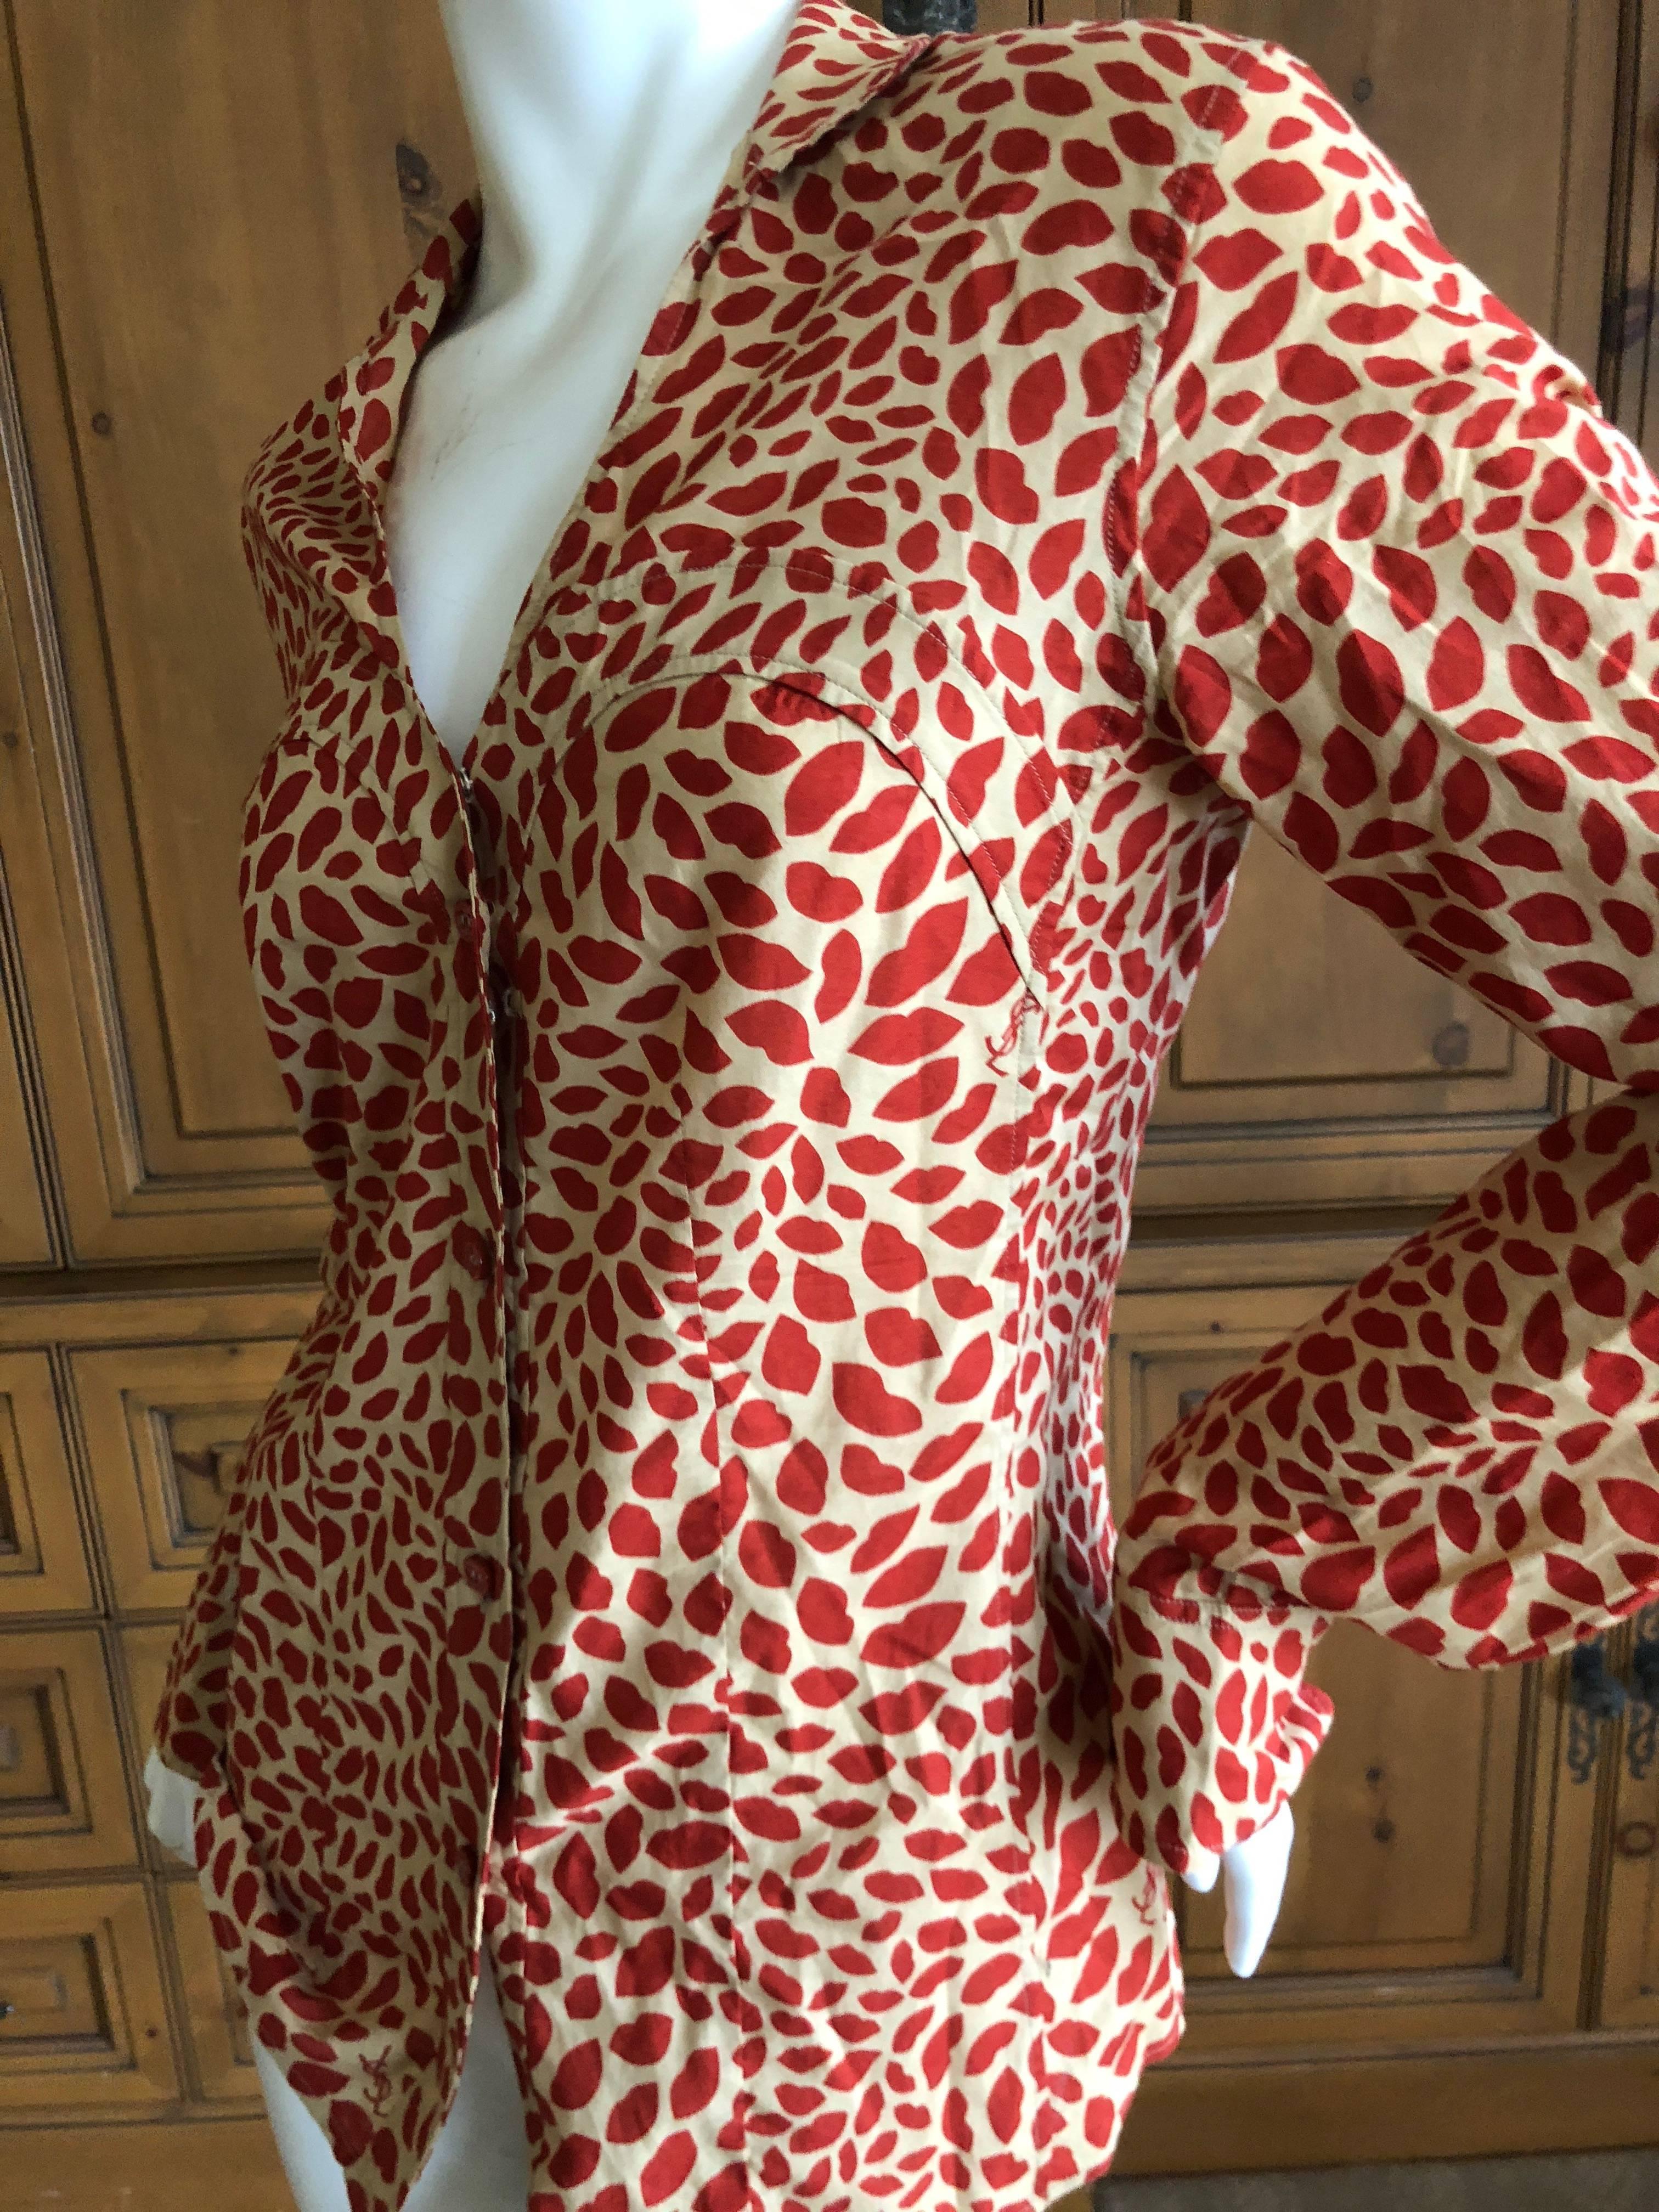 Yves Saint Laurent Rive Gauche Vintage Lips Print Two Piece Dress In Excellent Condition For Sale In Cloverdale, CA